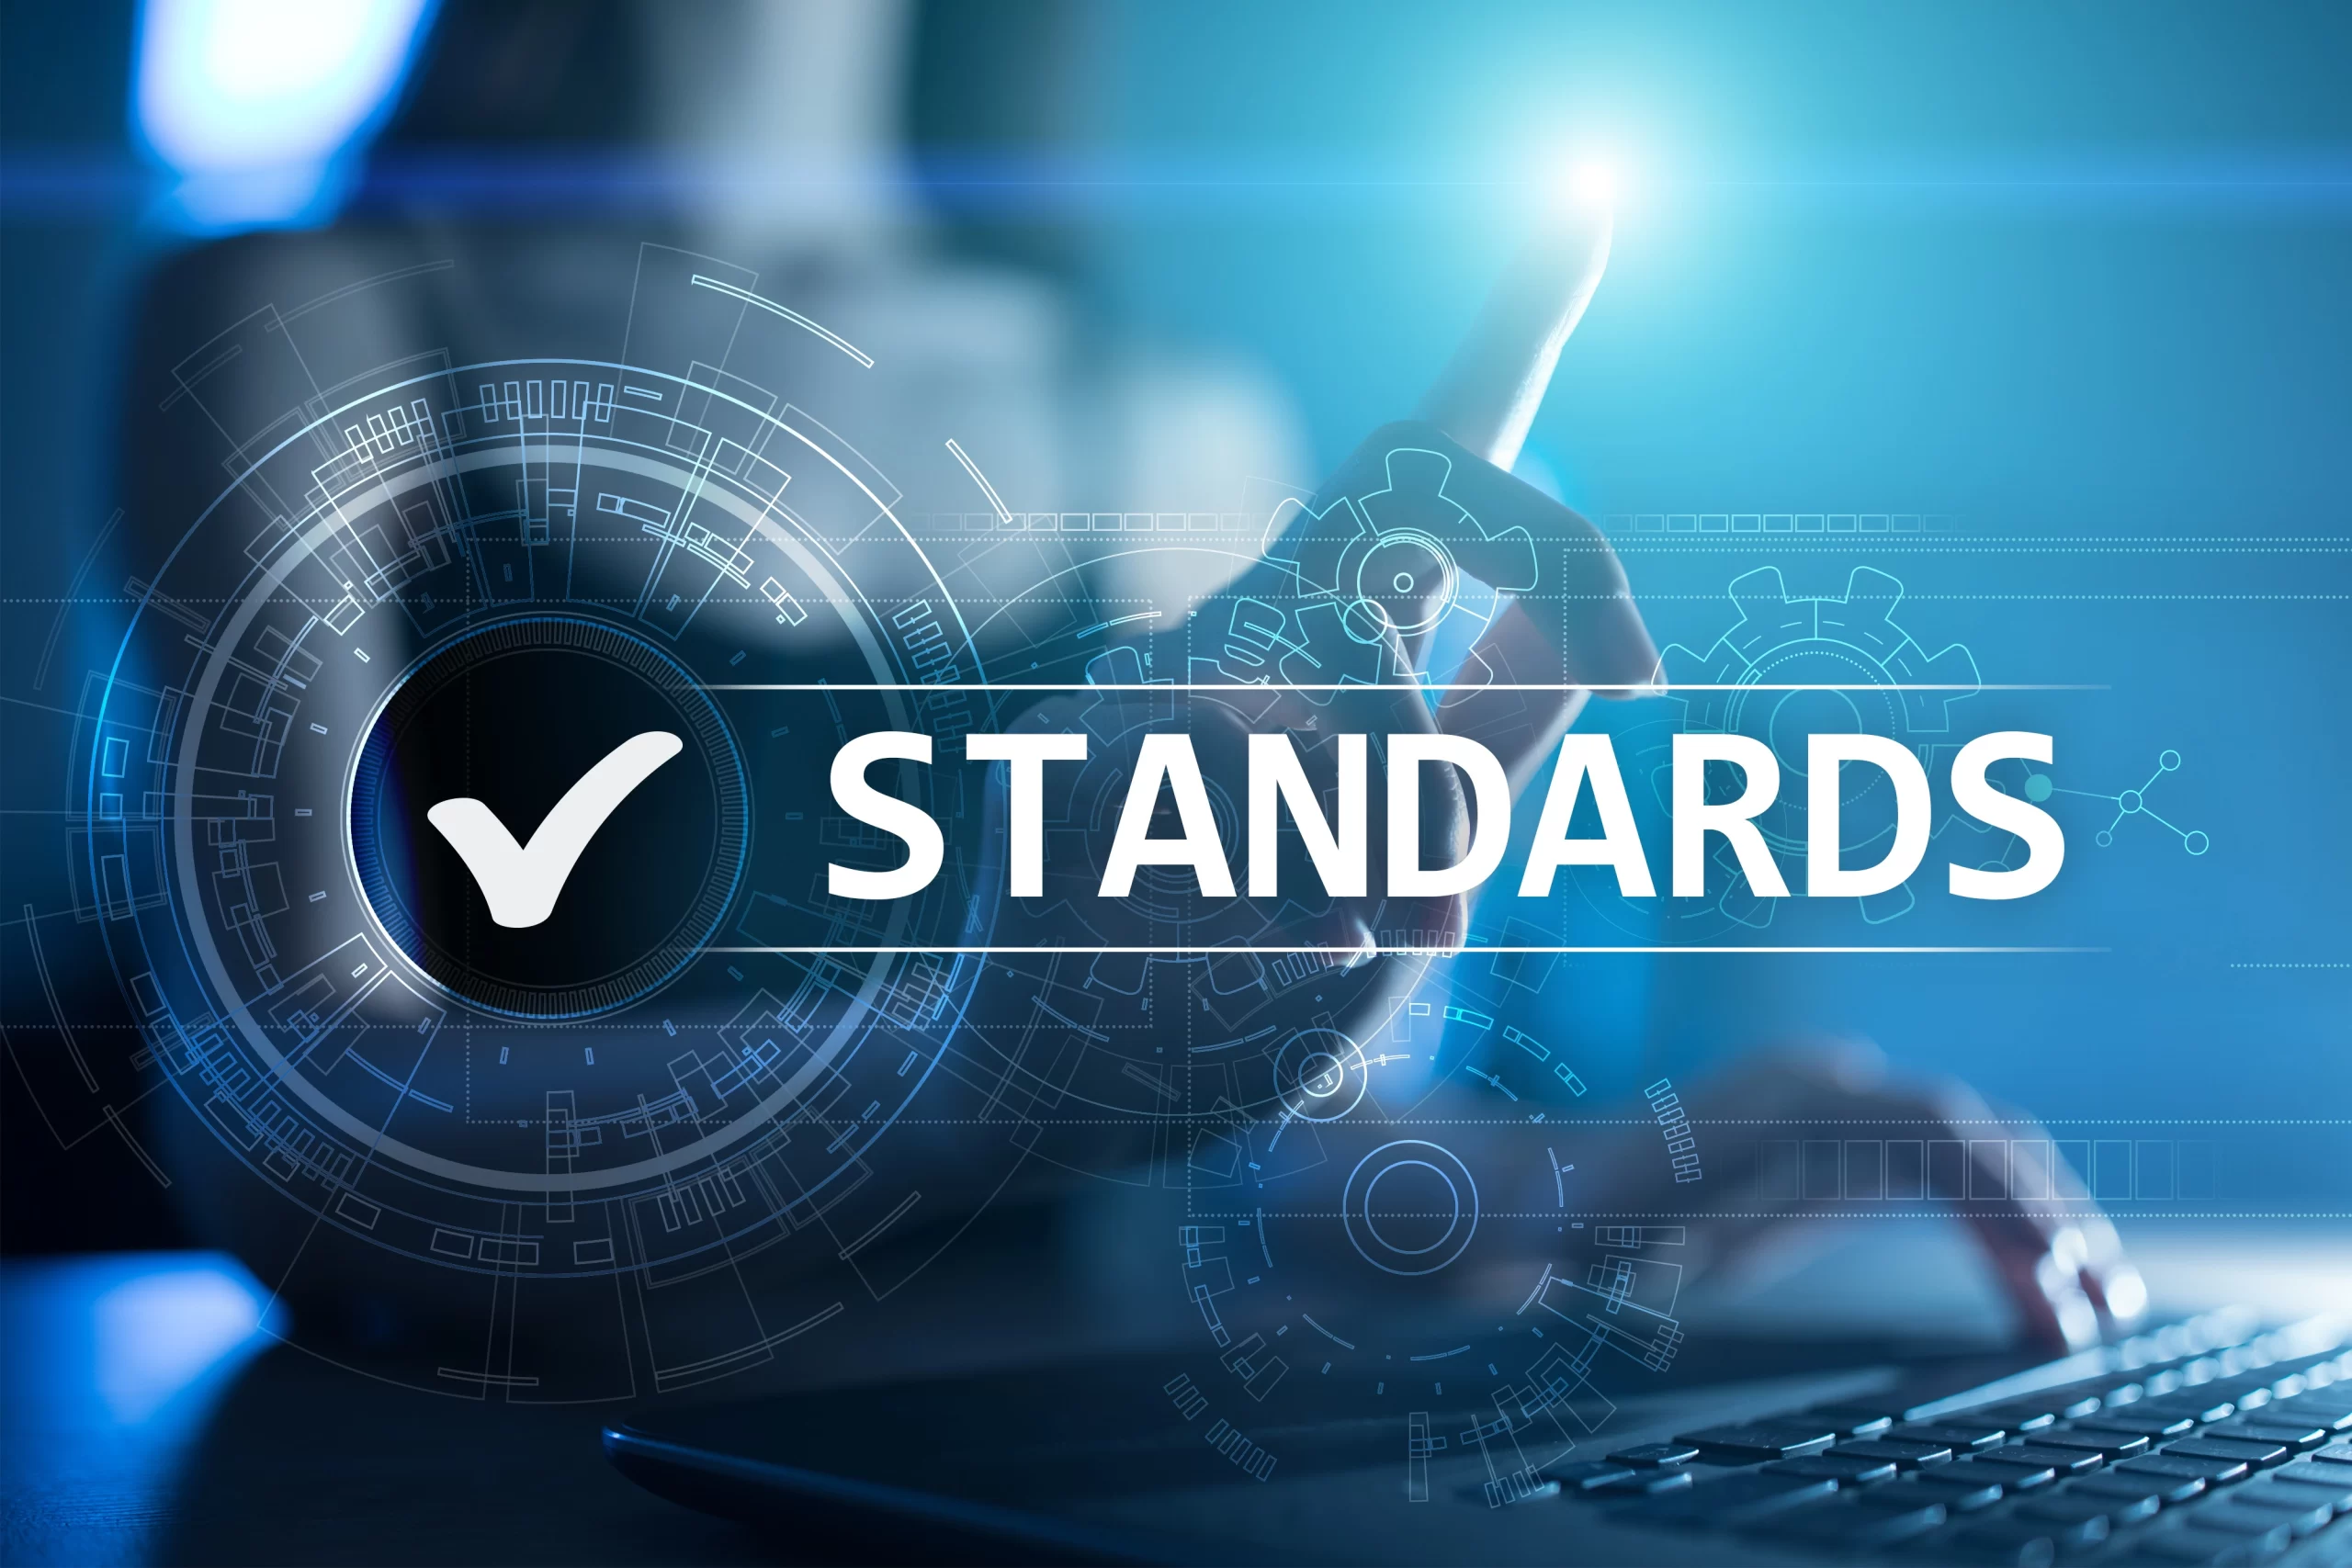 An image of standards